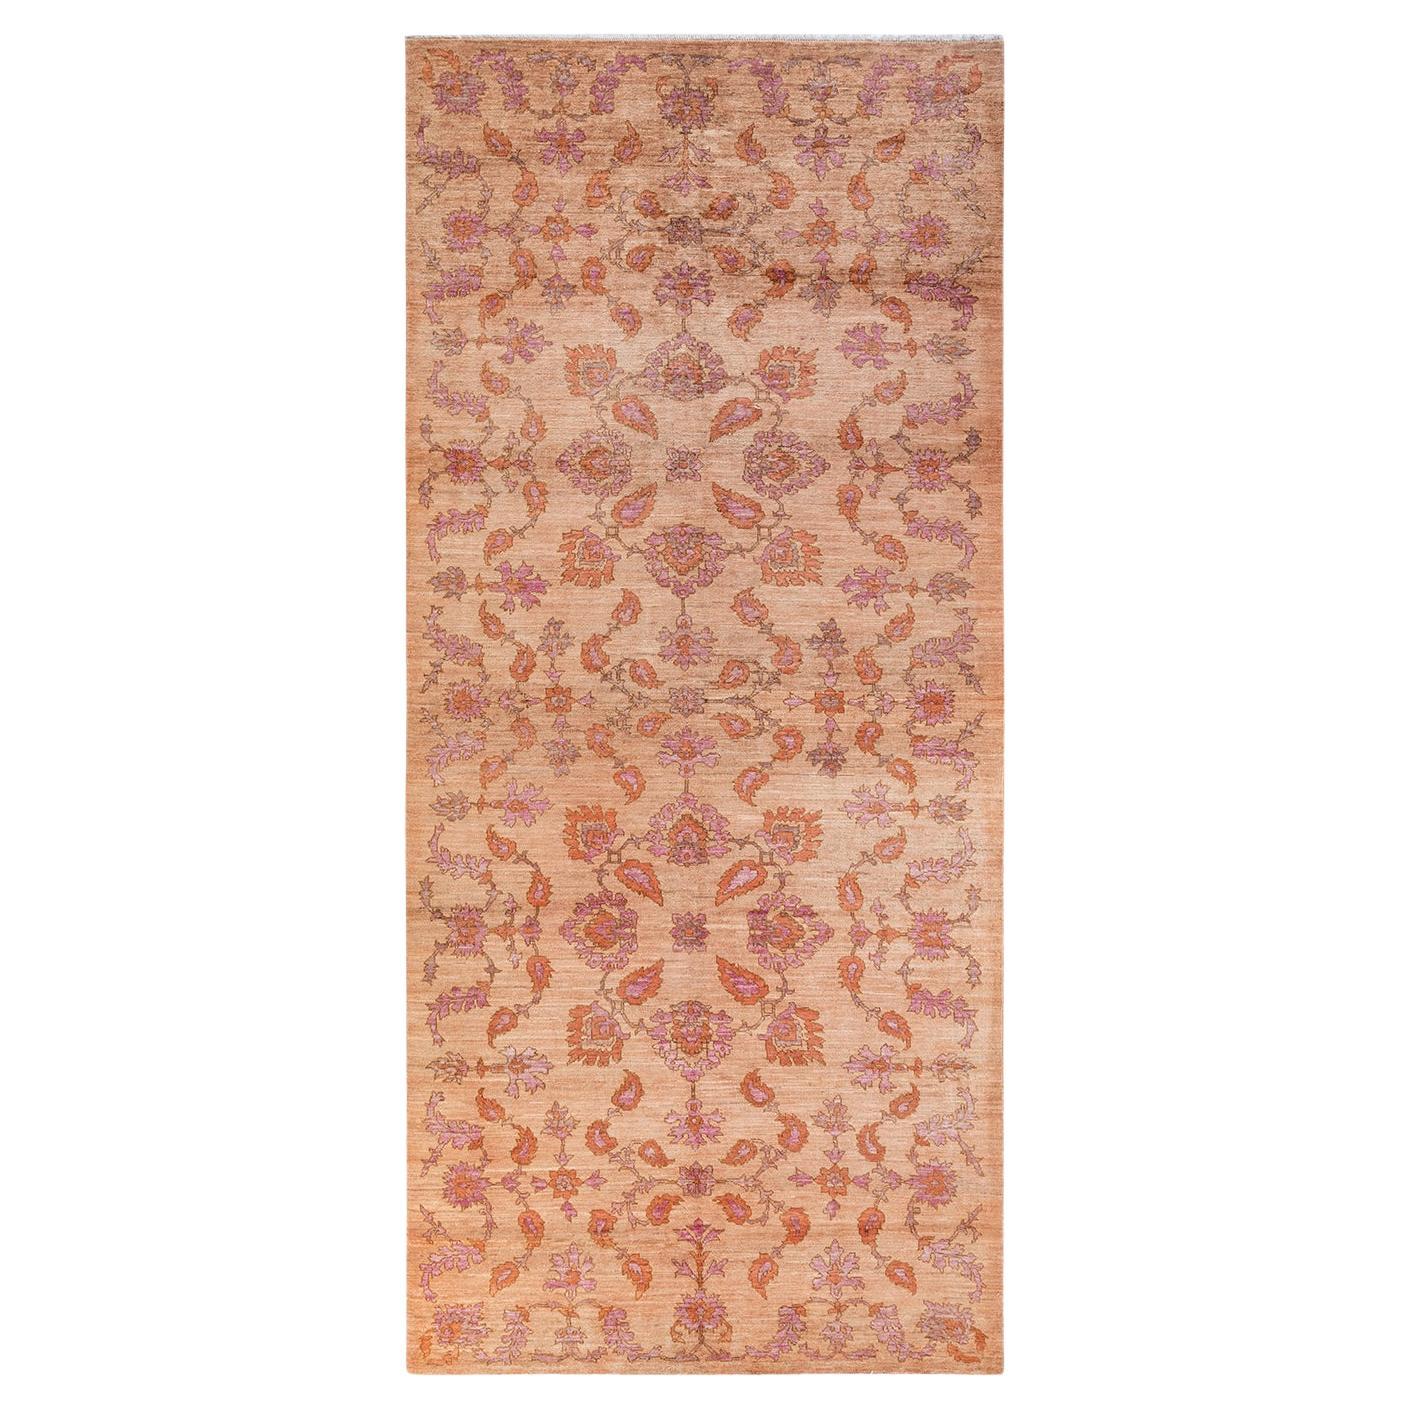 One-of-a-kind Hand Knotted Abstract Oushak Beige Area Rug